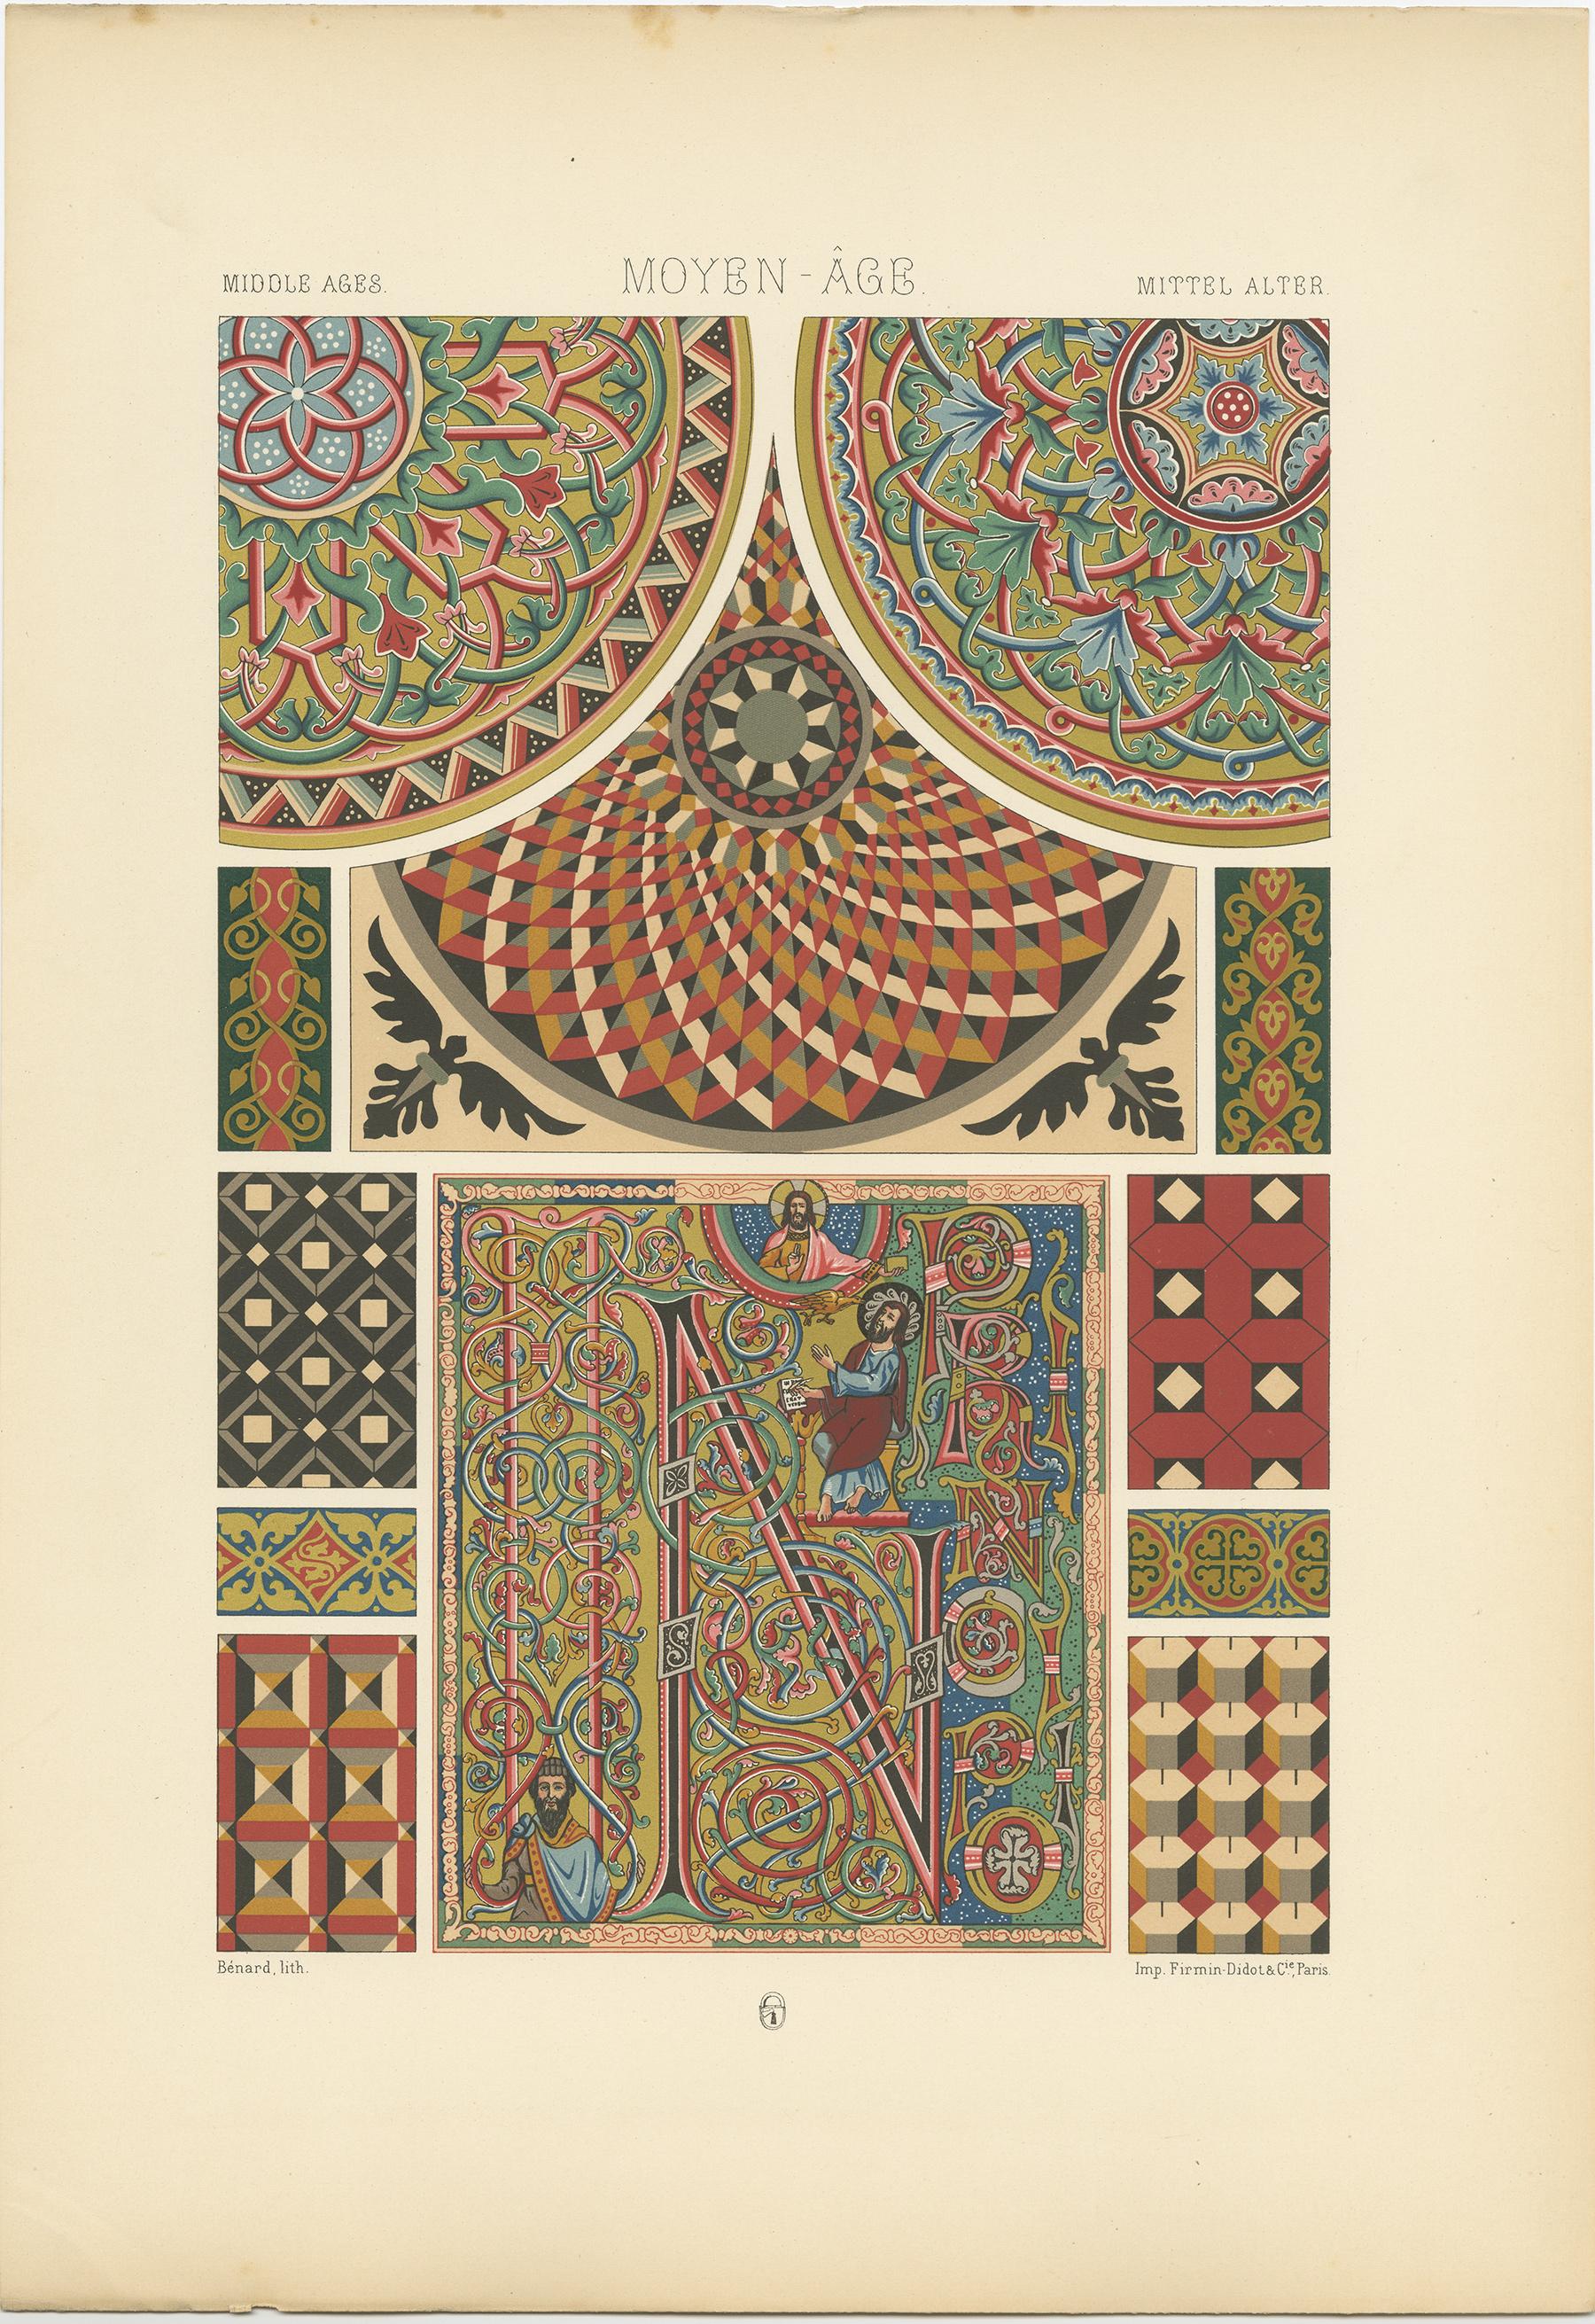 Antique print titled 'Middle Ages - Moyen Age - Mittel Alter'. Chromolithograph of mosaic and glass paintings, St. Mark's, Venice, manuscript initial
ornaments. This print originates from 'l'Ornement Polychrome' by Auguste Racinet. Published circa